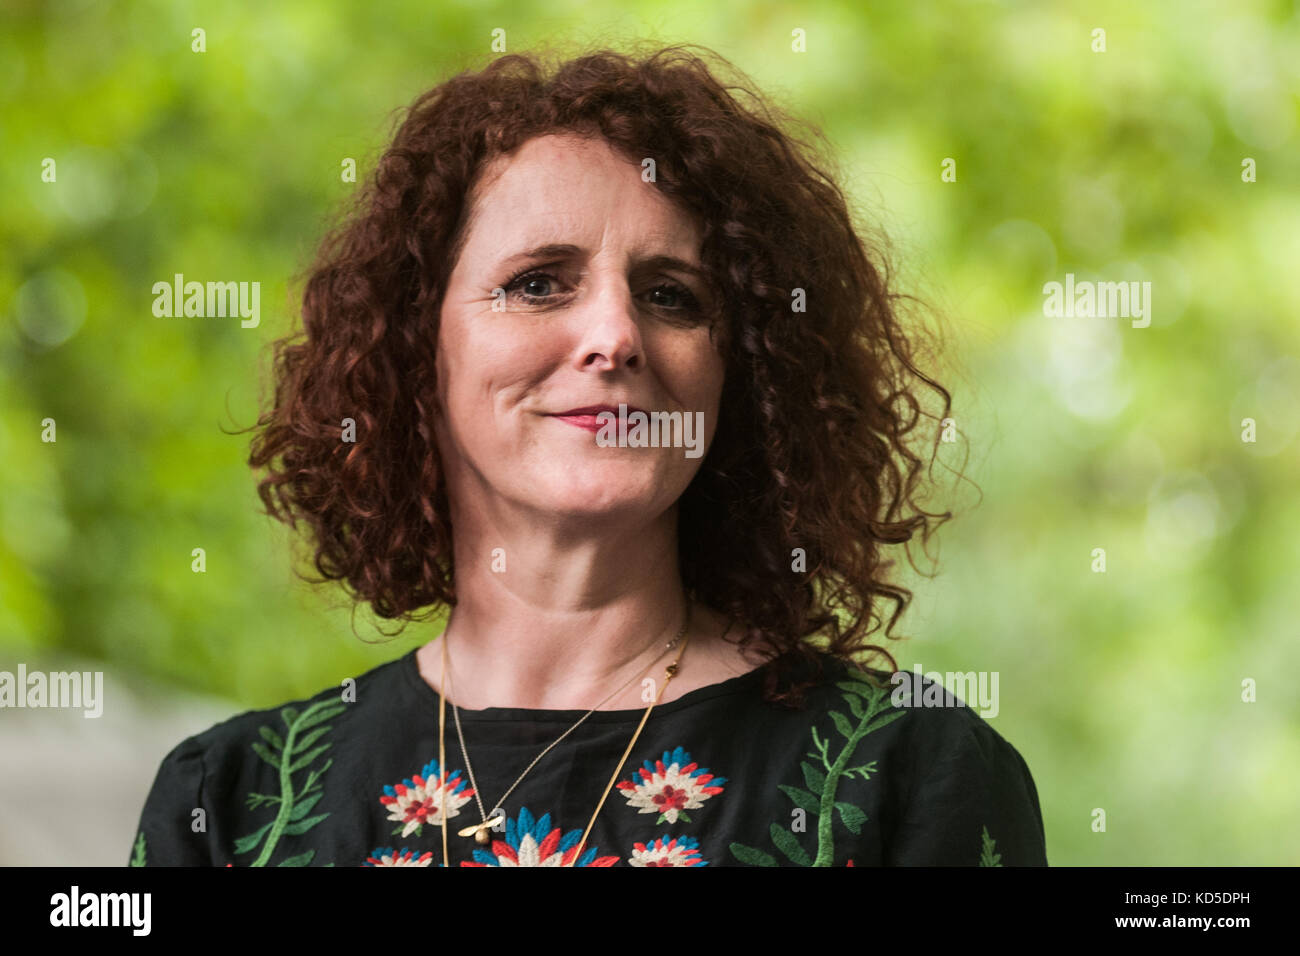 Northern Irish author of contemporary fiction Maggie O'Farrell attends a photocall during the Edinburgh International Book Festival on August 12, 2017 Stock Photo